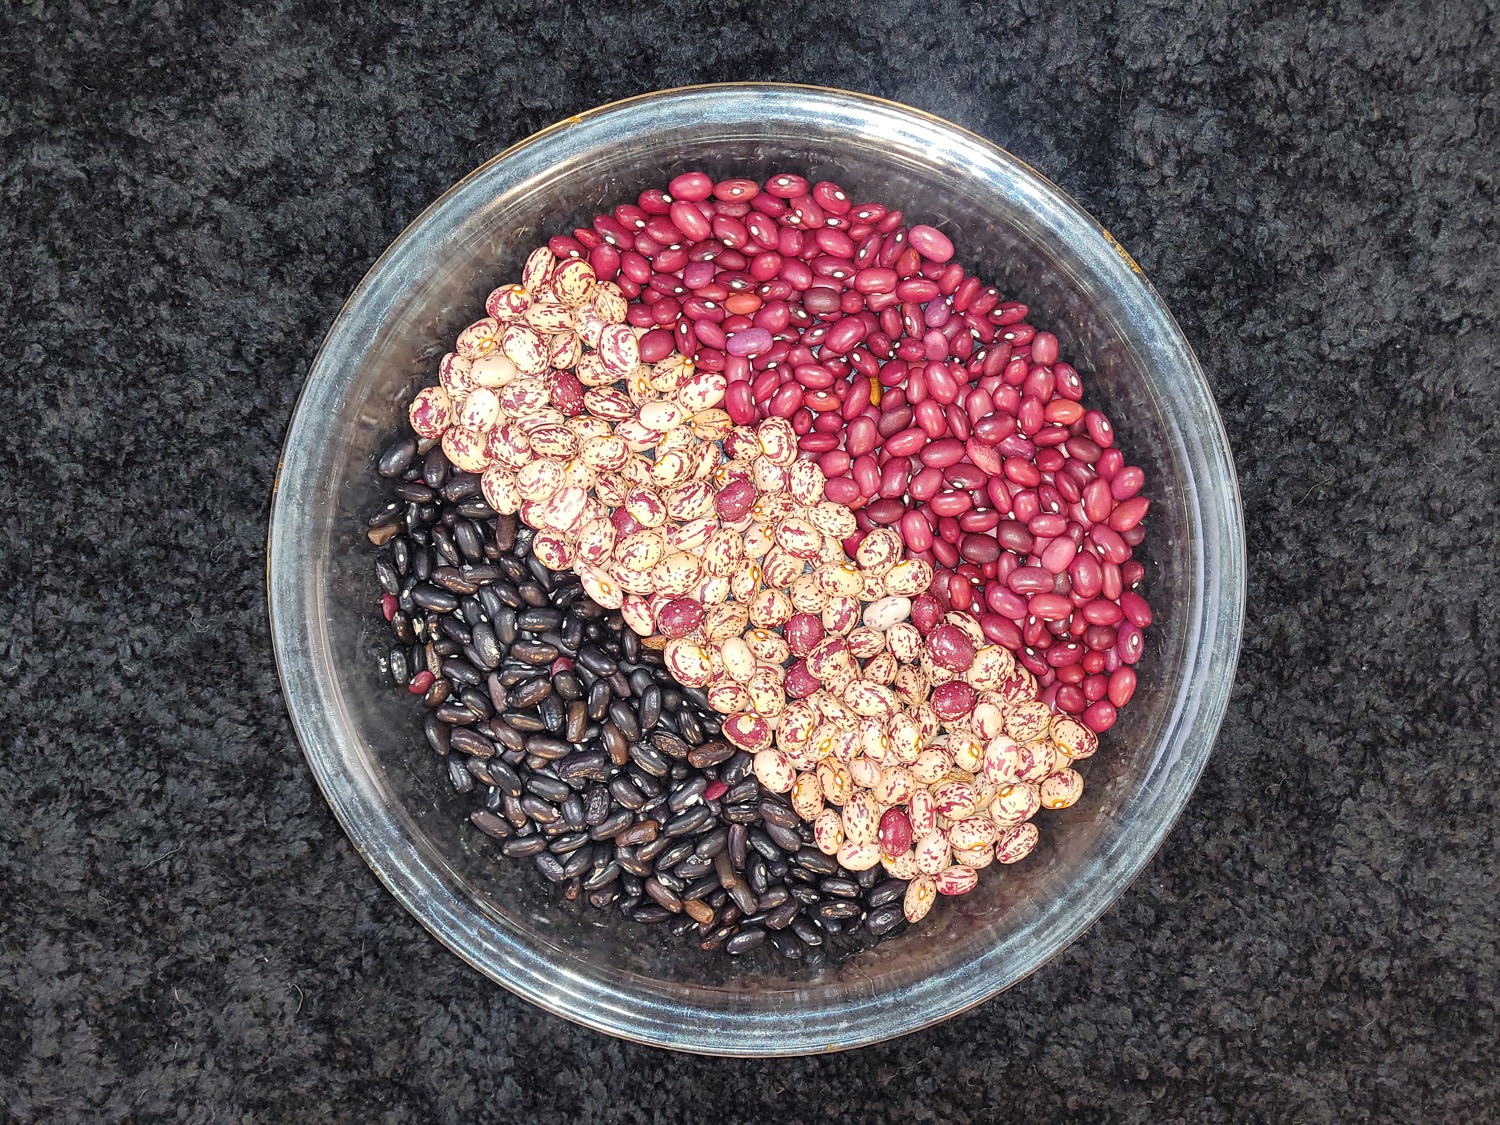 3 Beans for chili, anasazi beans, pinto beans and turtle beans